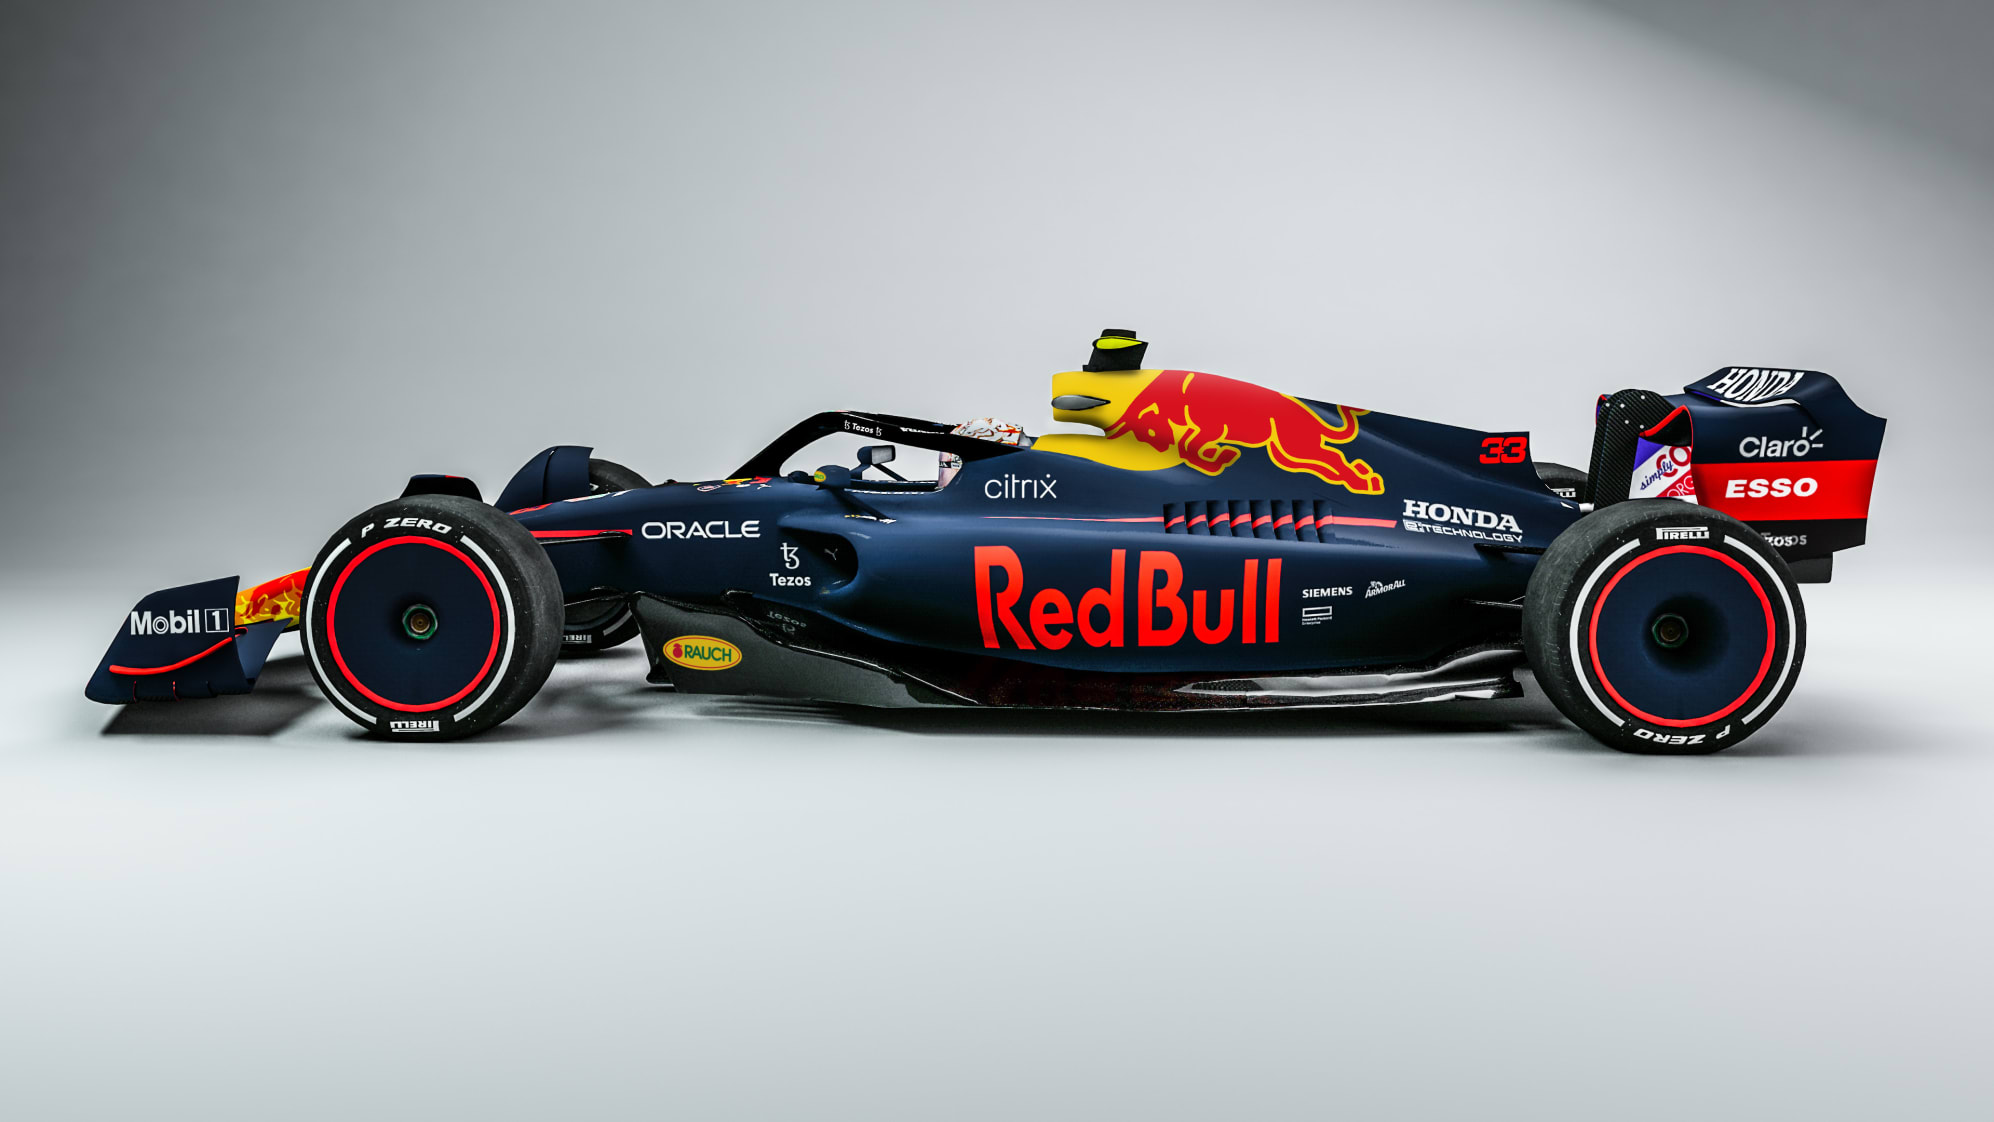 MUST-SEE: Check out the teams' 2021 liveries on the 2022 car | Formula 1®